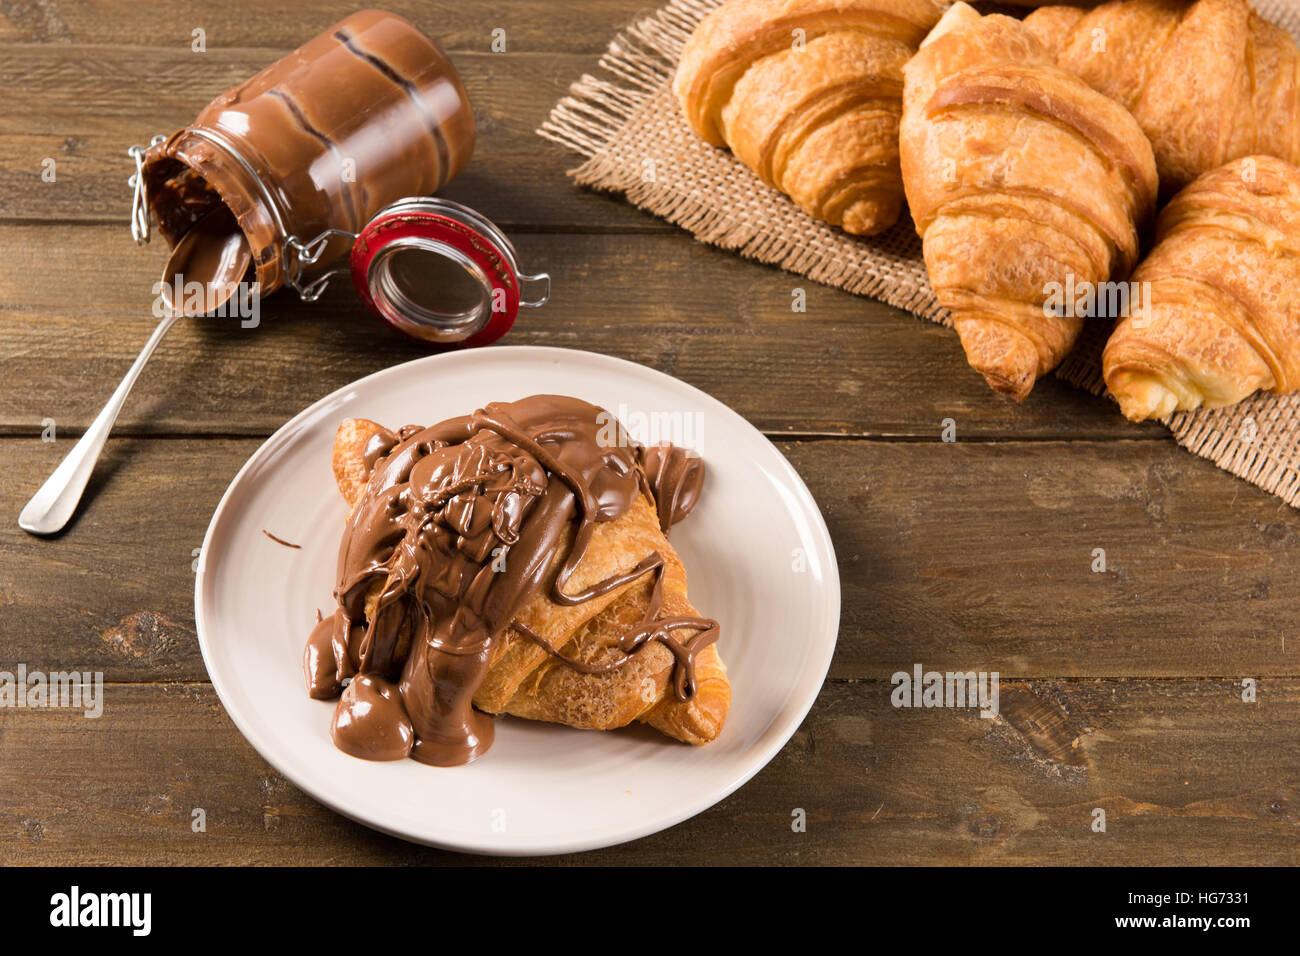 Croissant with chocolate cream on the table in natural light Stock Photo